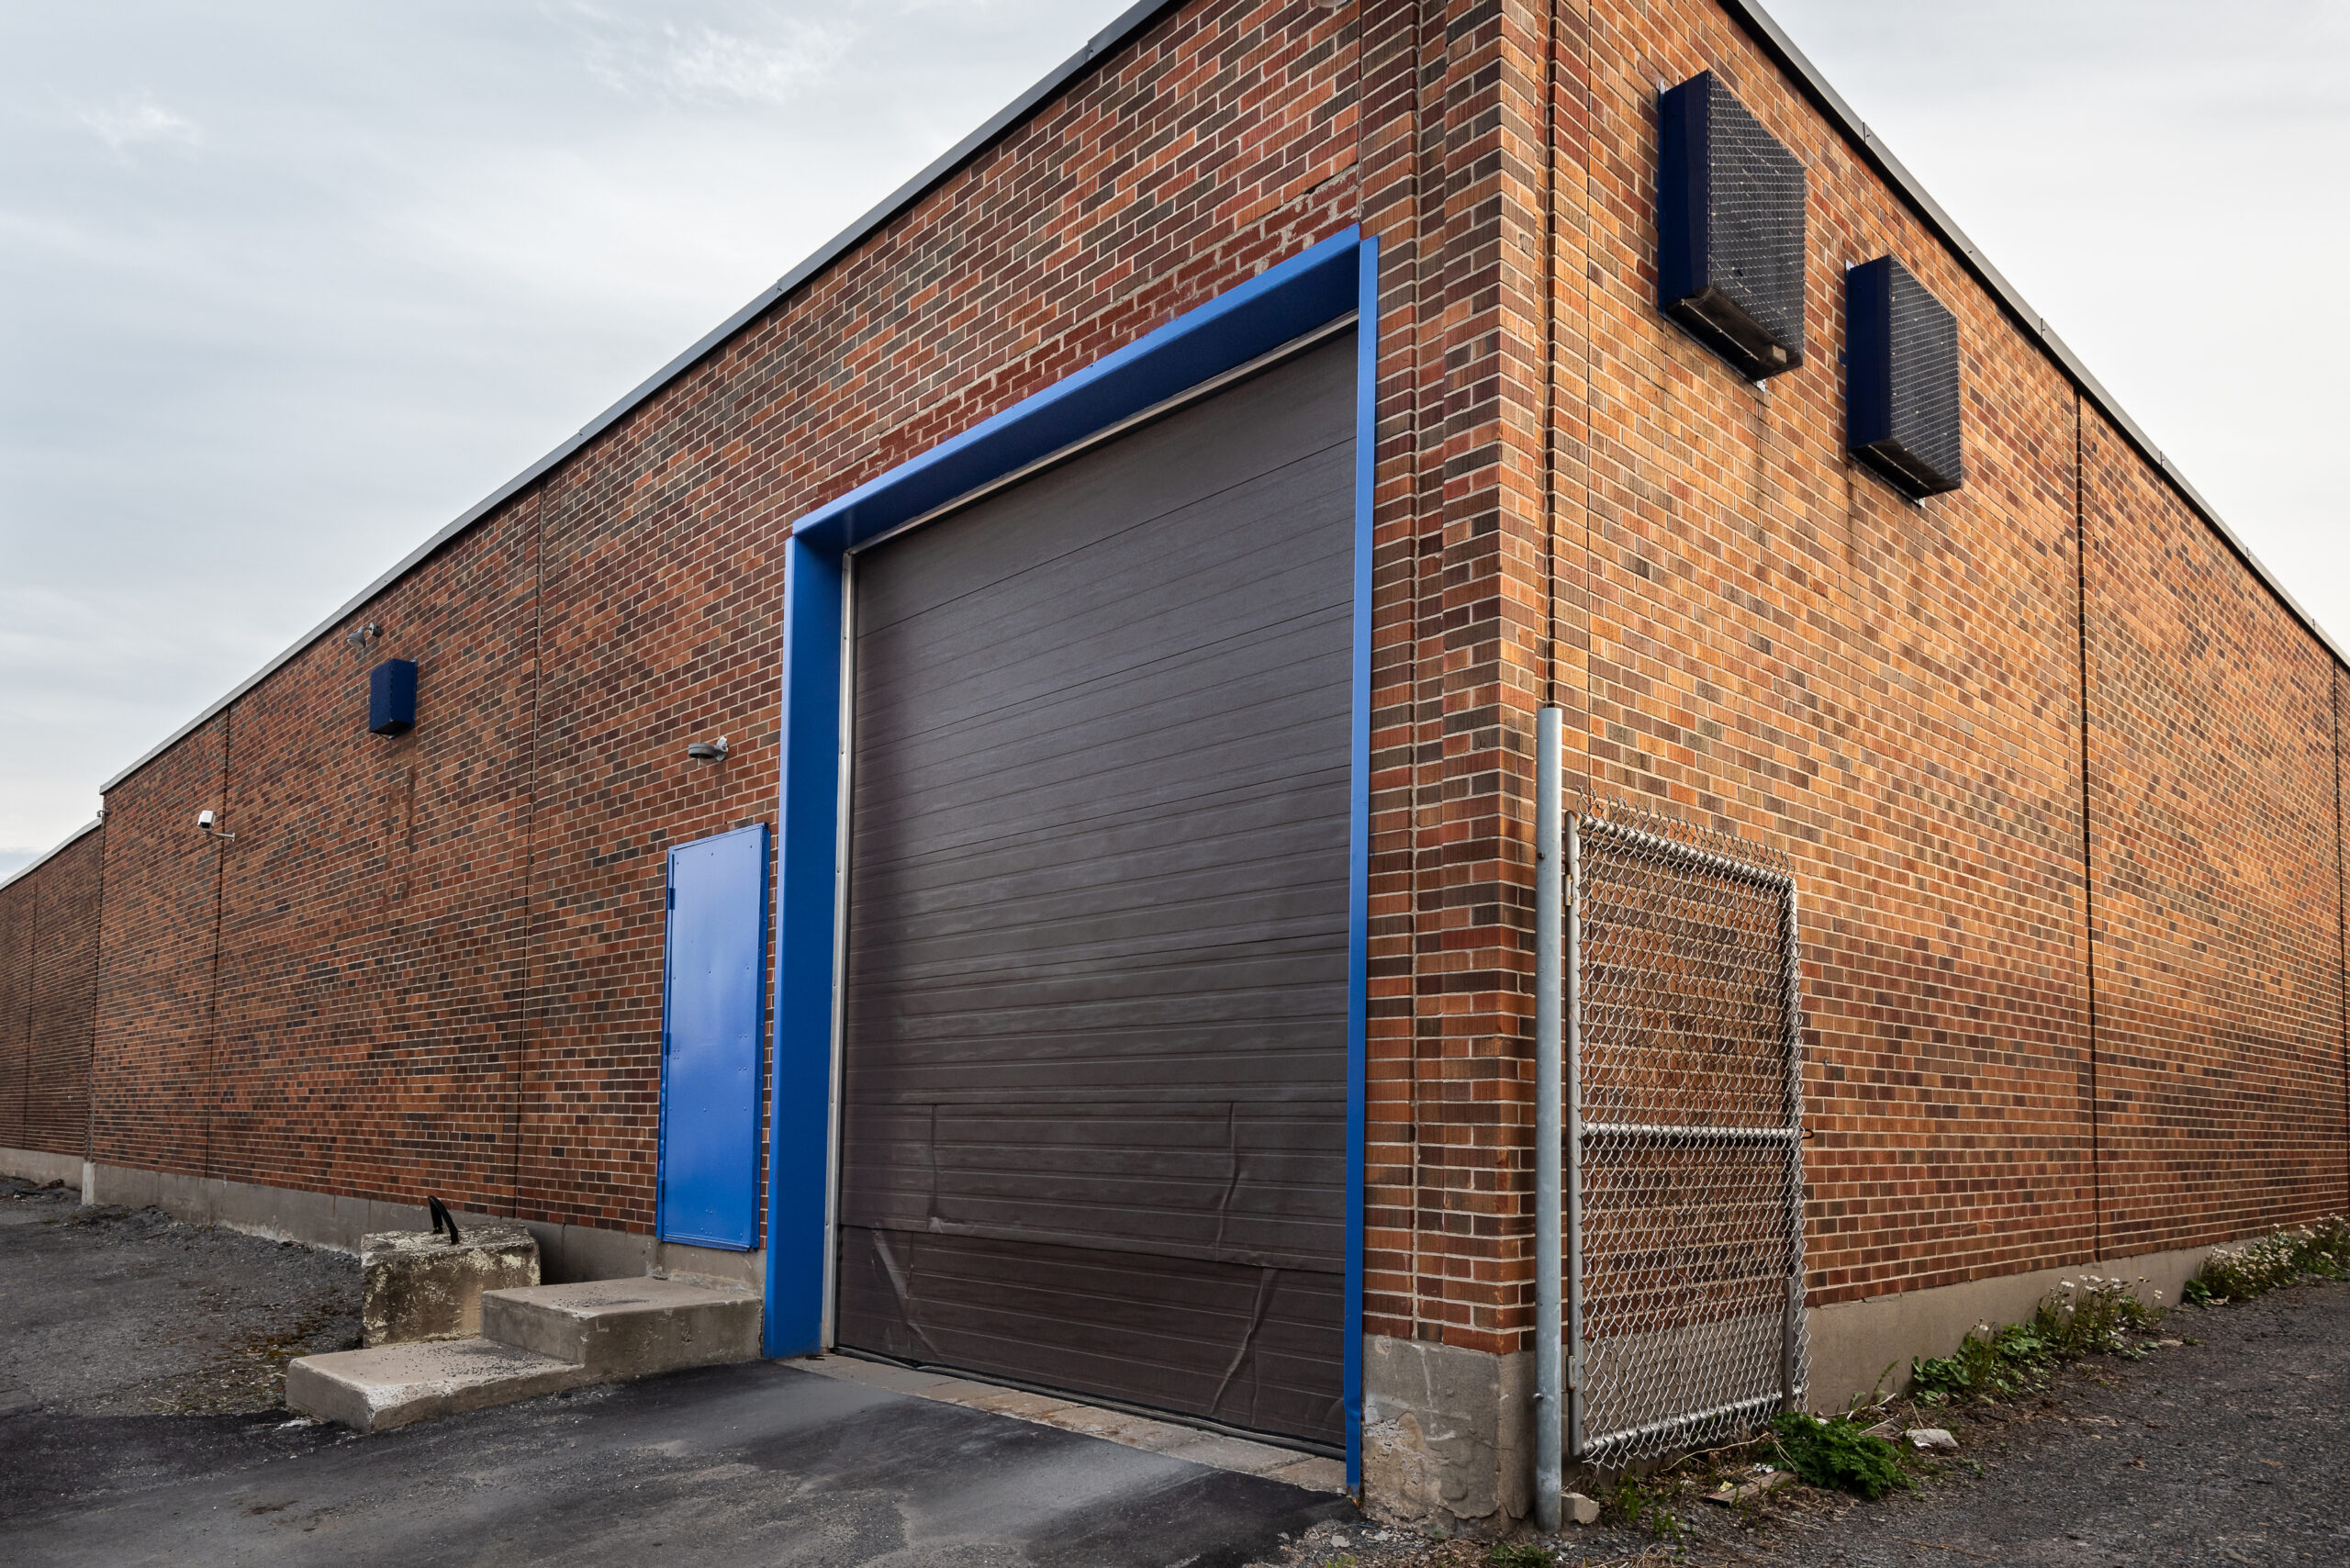 The exterior corner of a brick REO property with a loading dock. The door to the loading dock is closed.